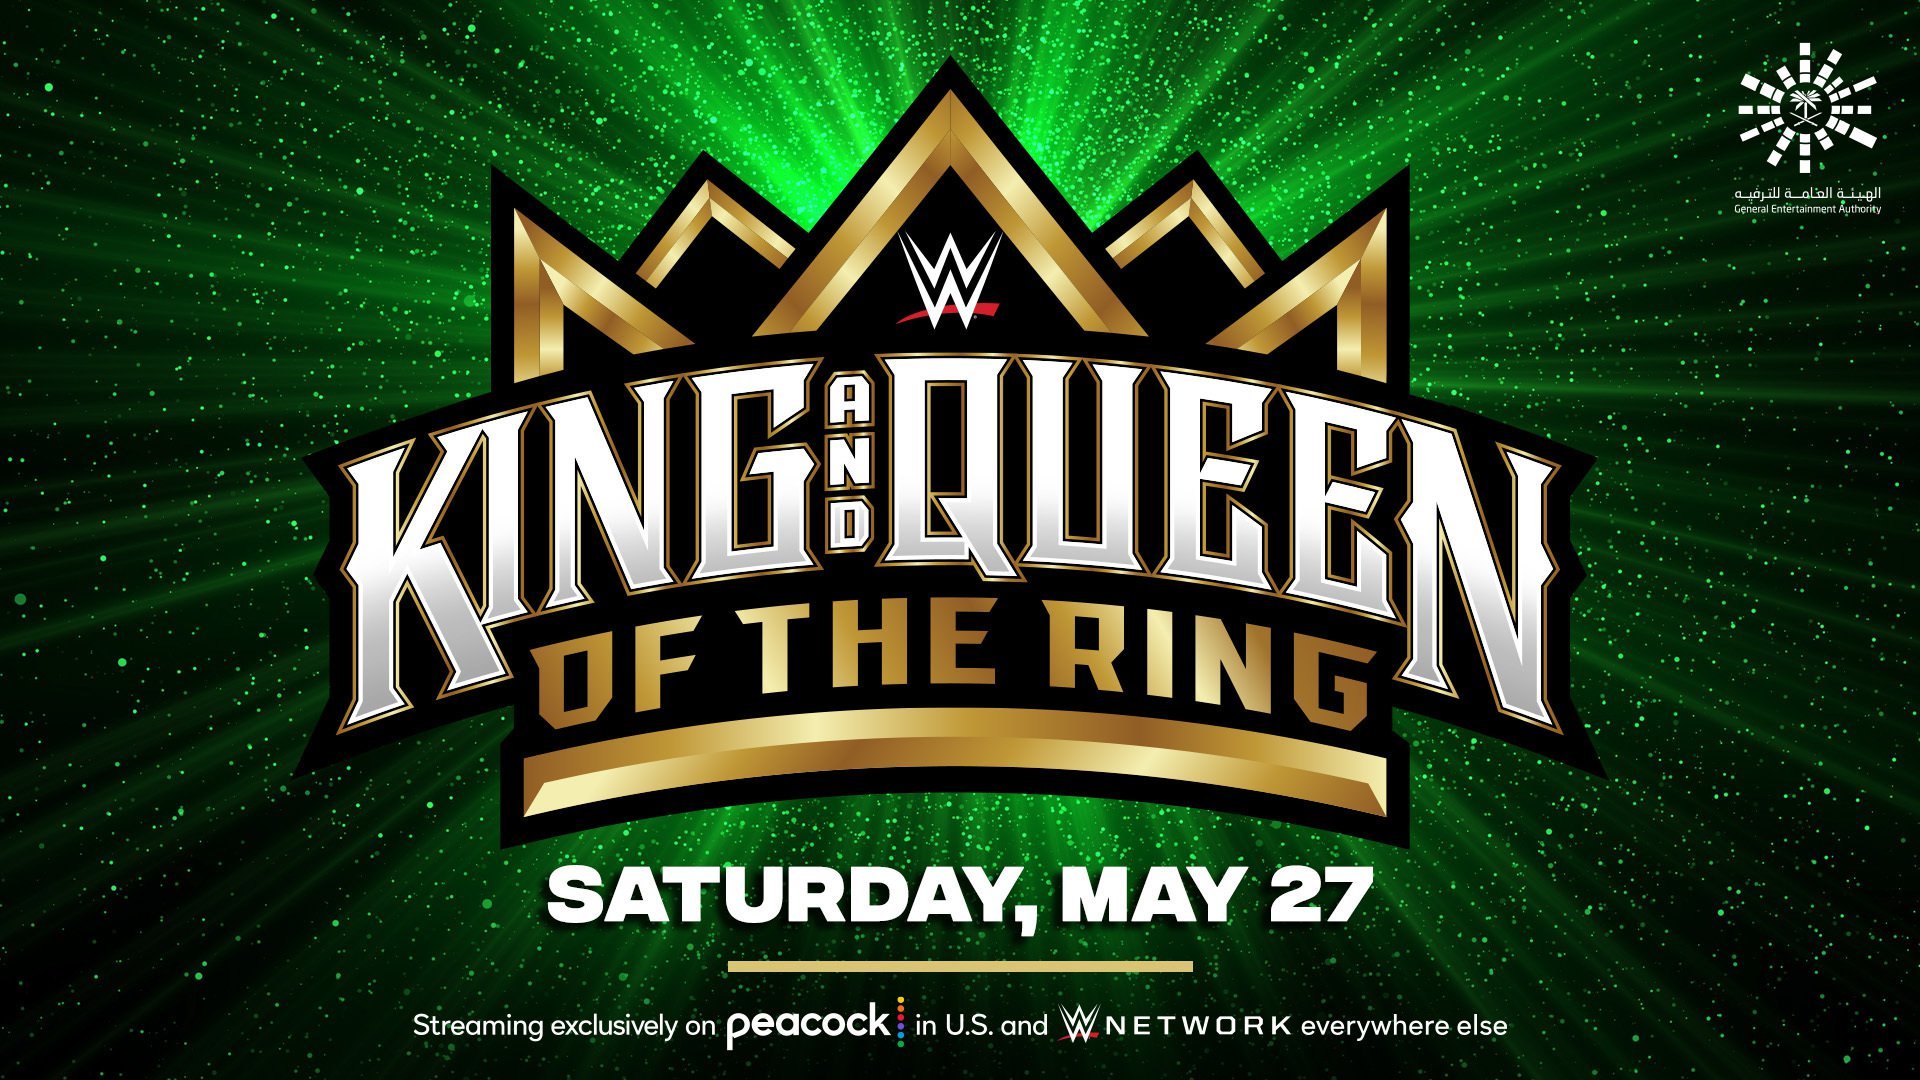 Who were the victors in the initial King and Queen of the Ring matches at the WWE Live Event last Saturday?